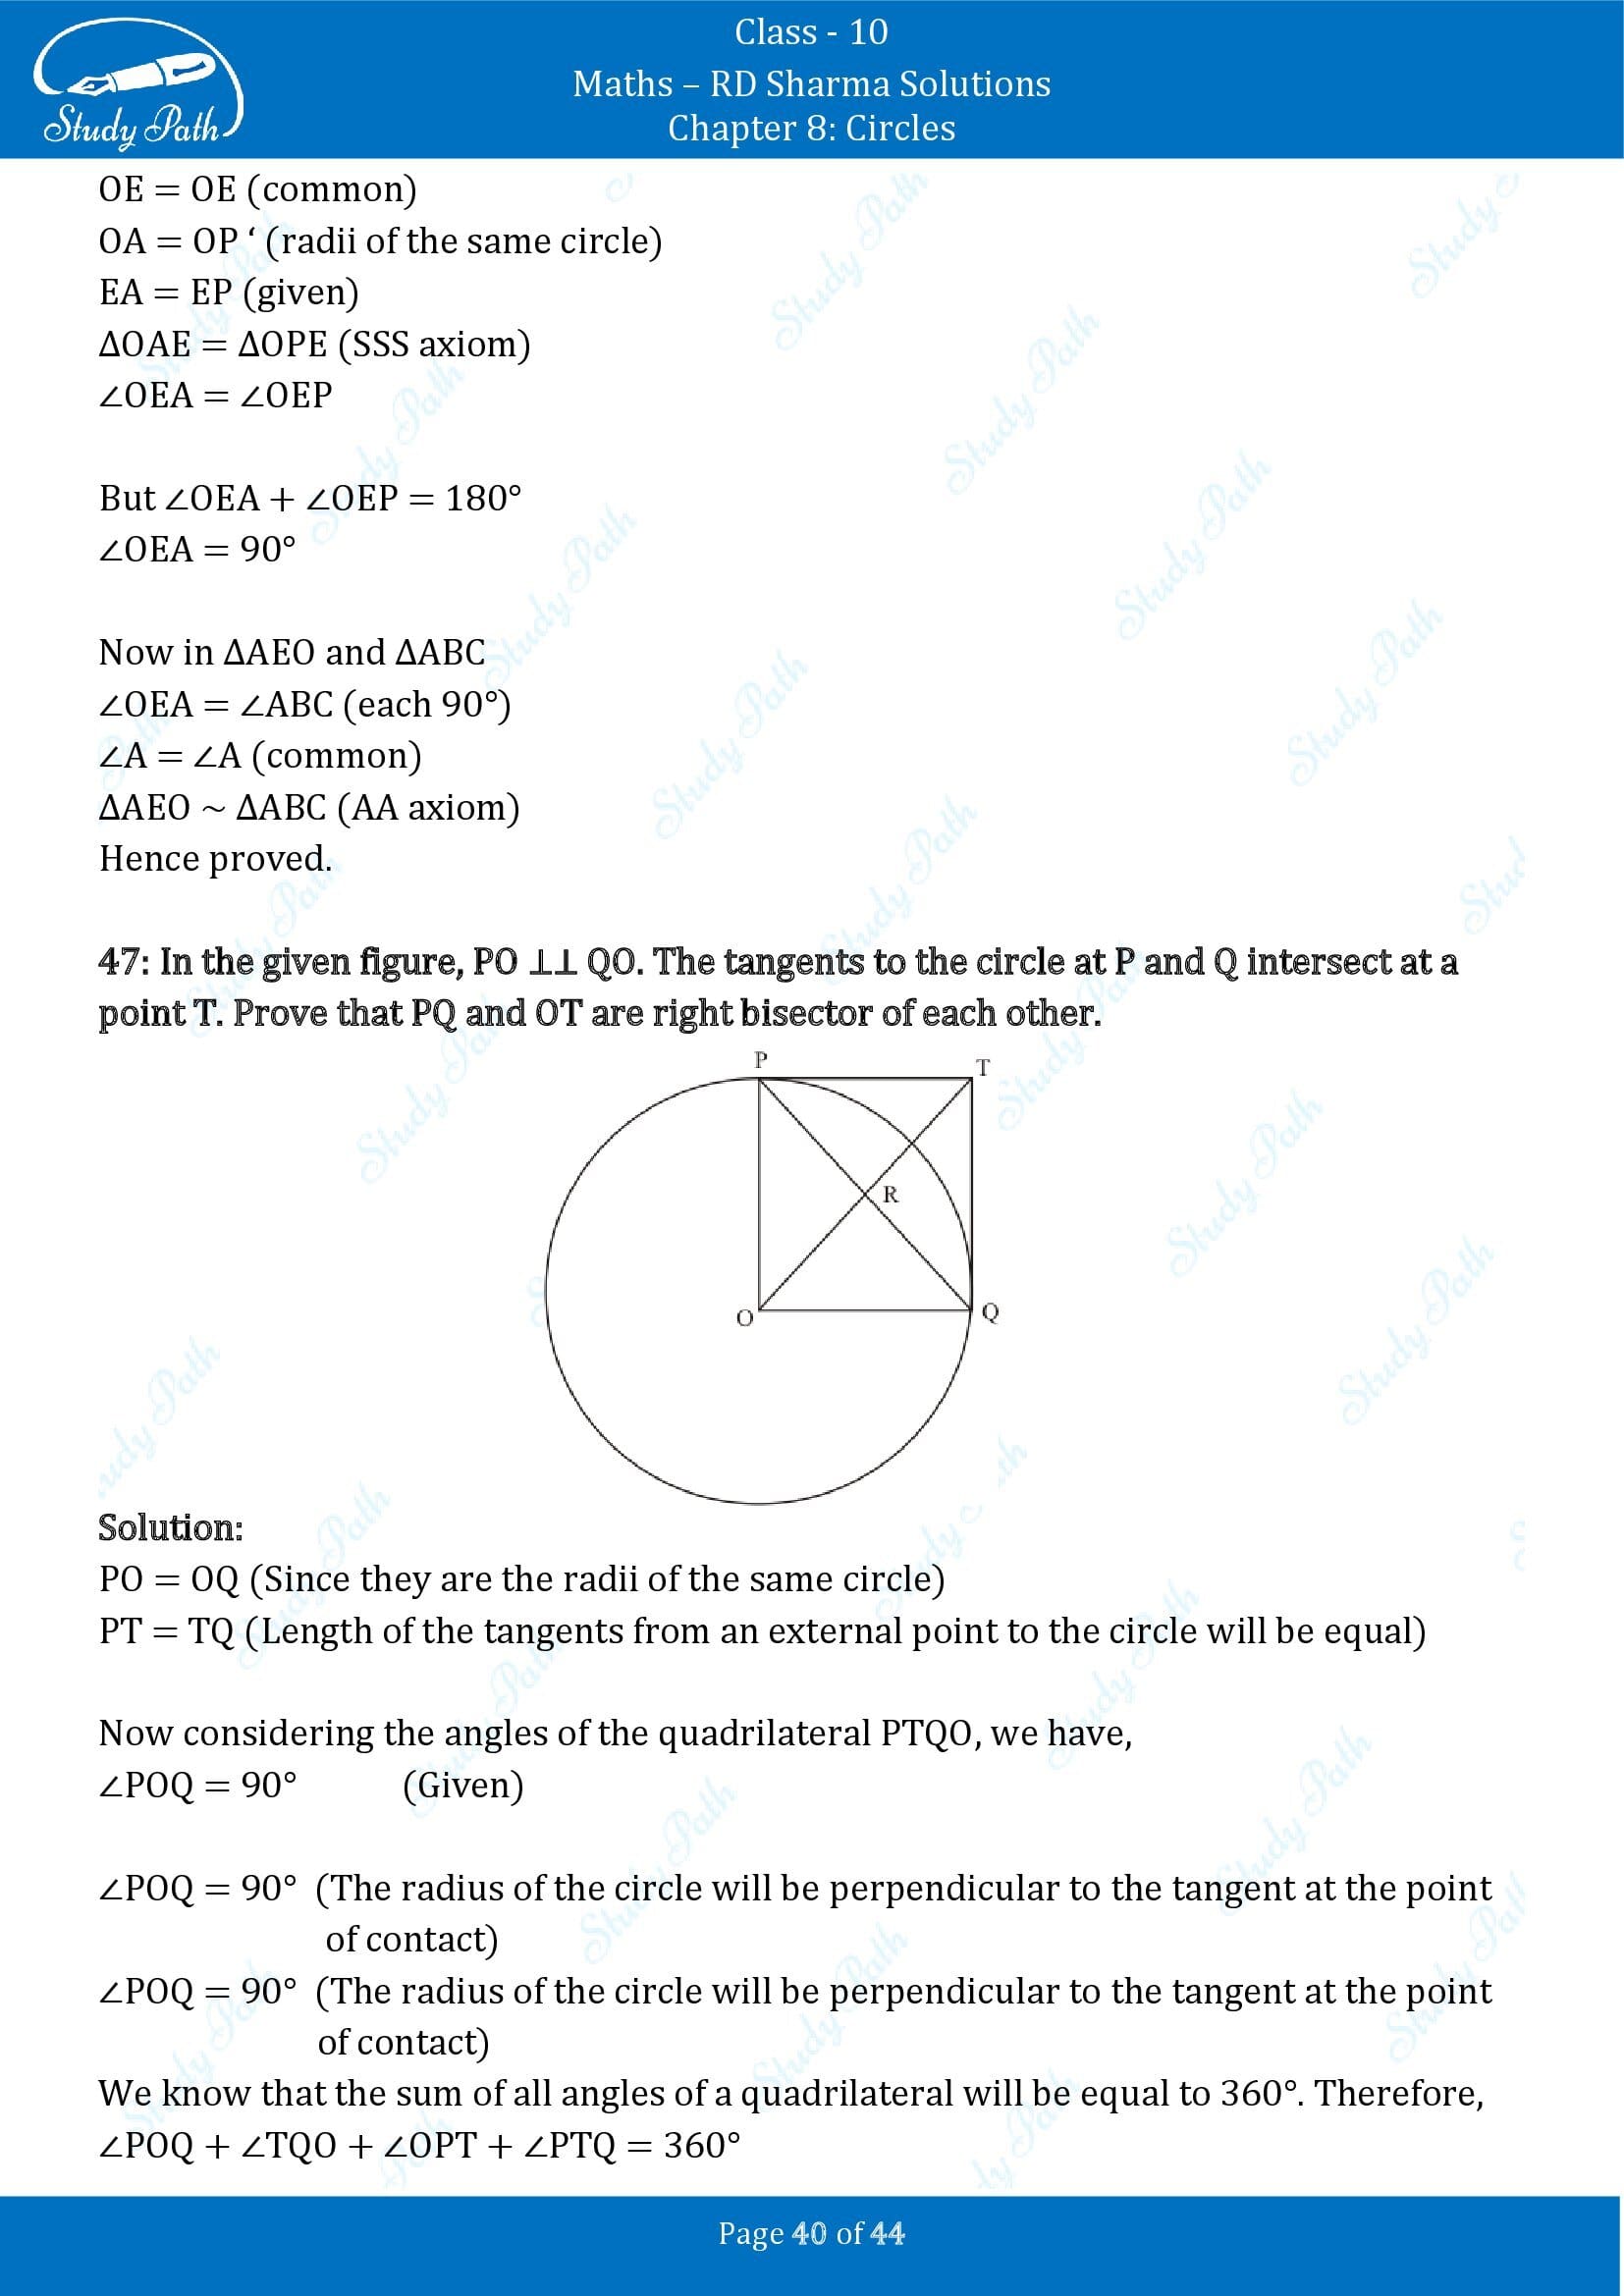 RD Sharma Solutions Class 10 Chapter 8 Circles Exercise 8.2 00040